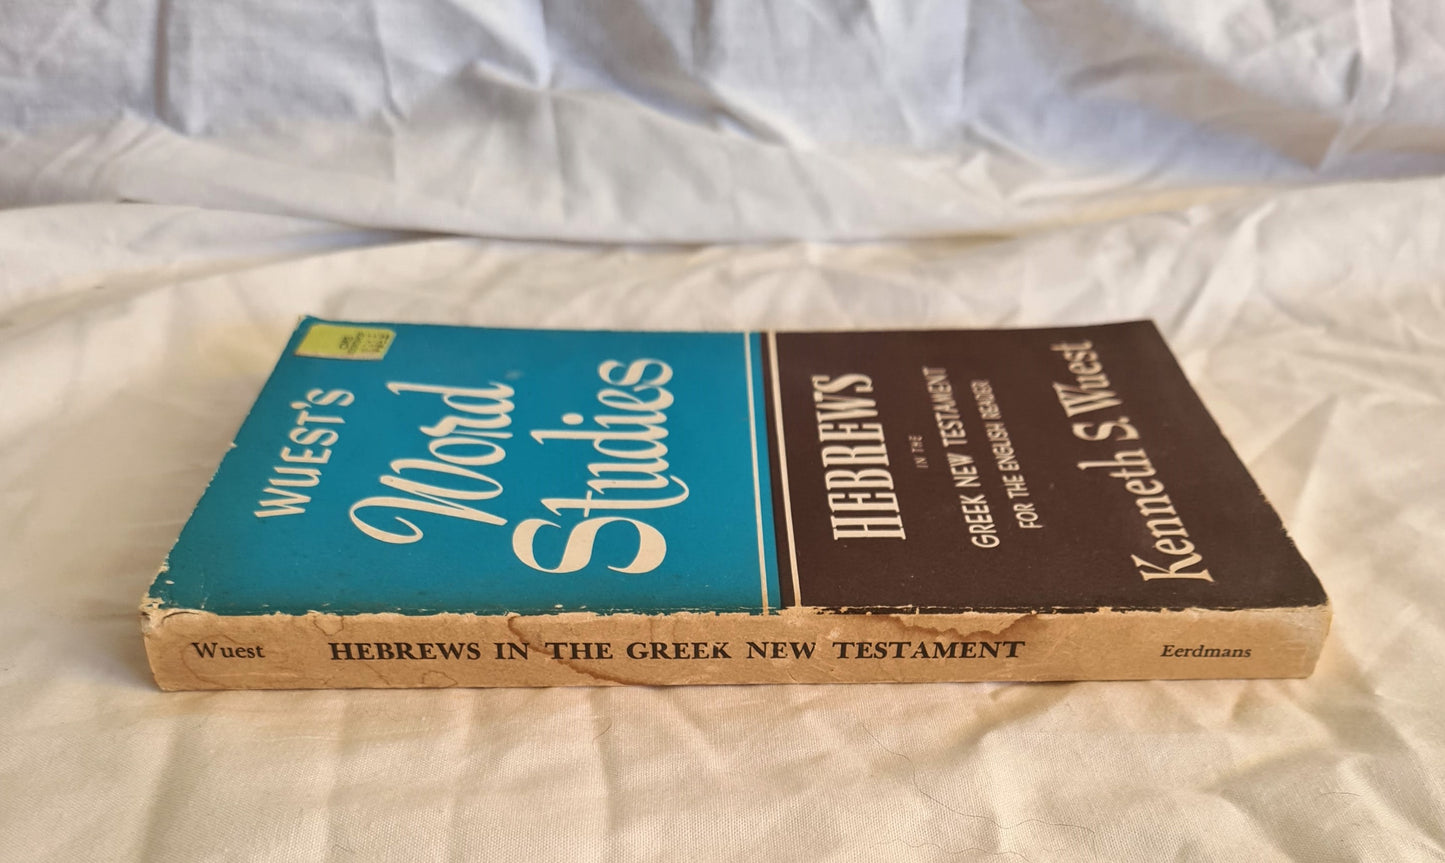 Hebrews in the Greek New Testament by Kenneth S. Wuest